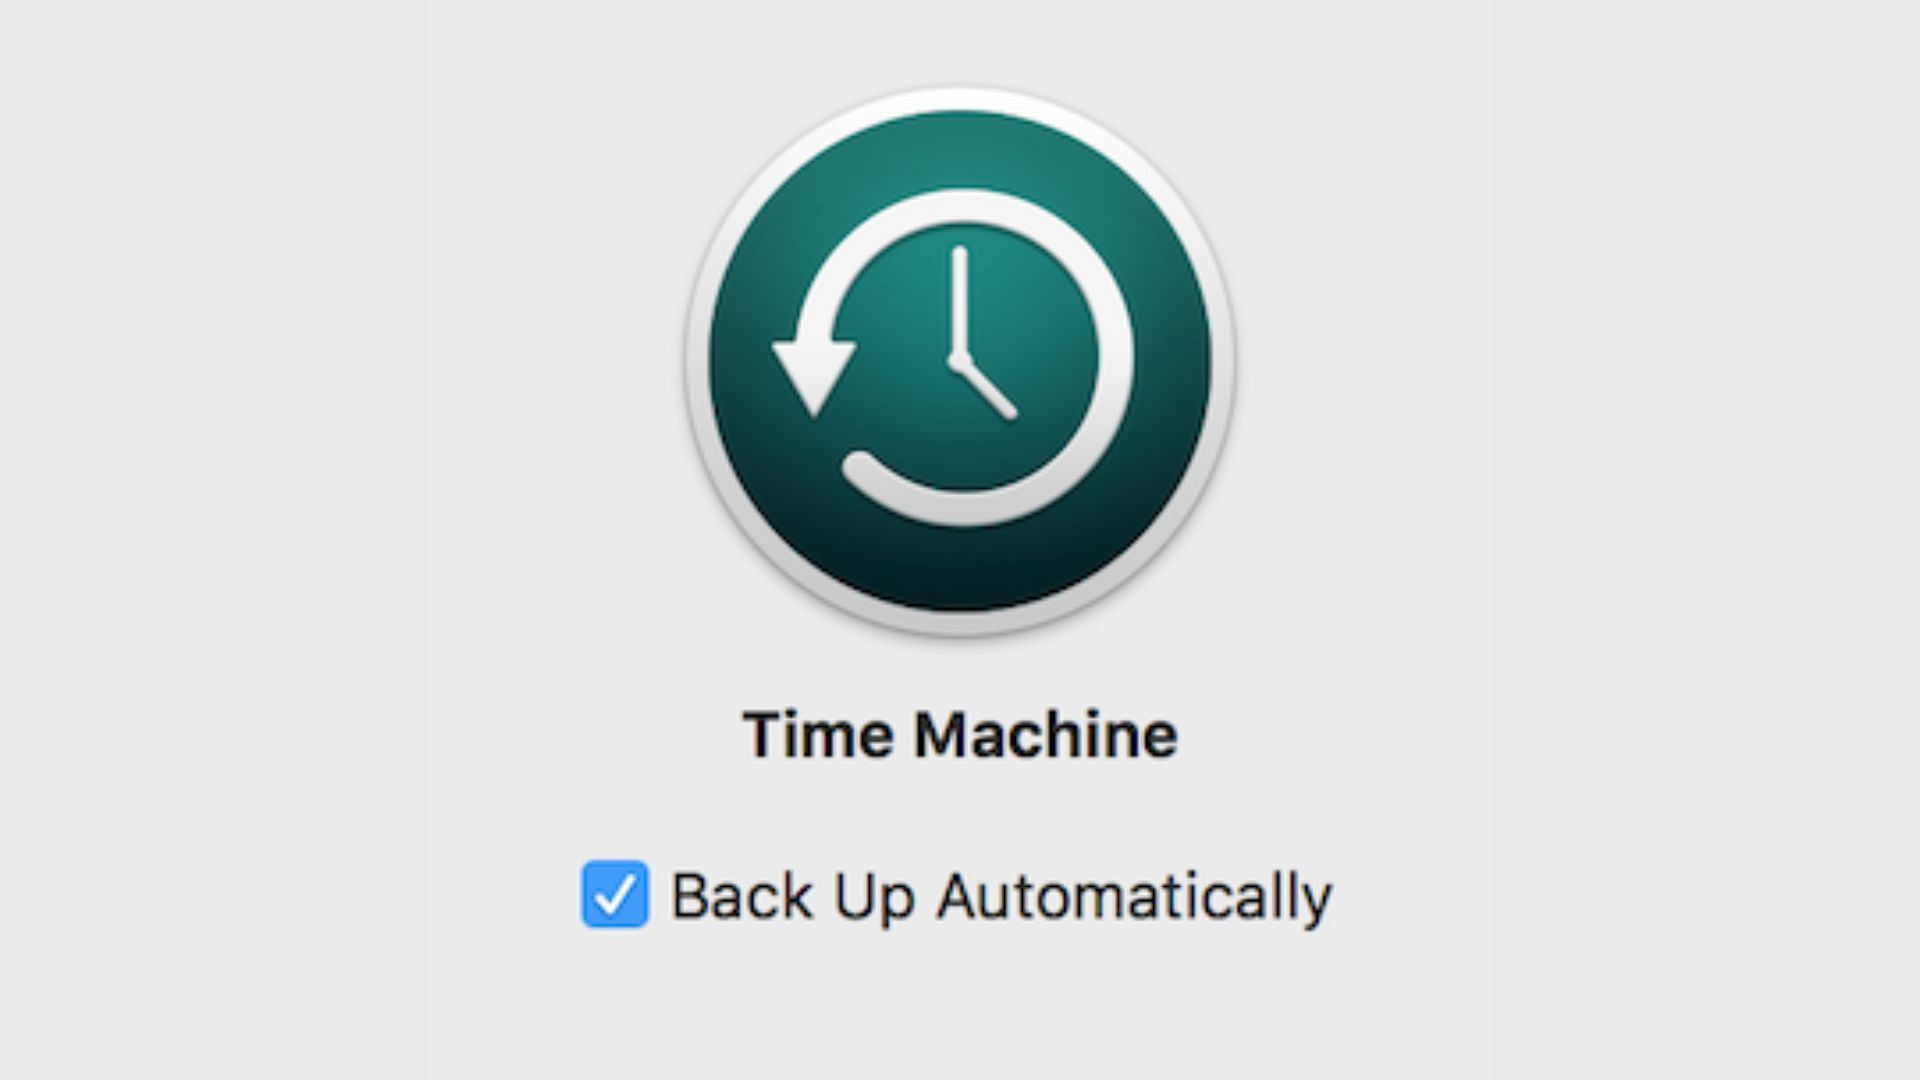 Time Machine is an in-built backup application for macOS (Image via Microsoft)